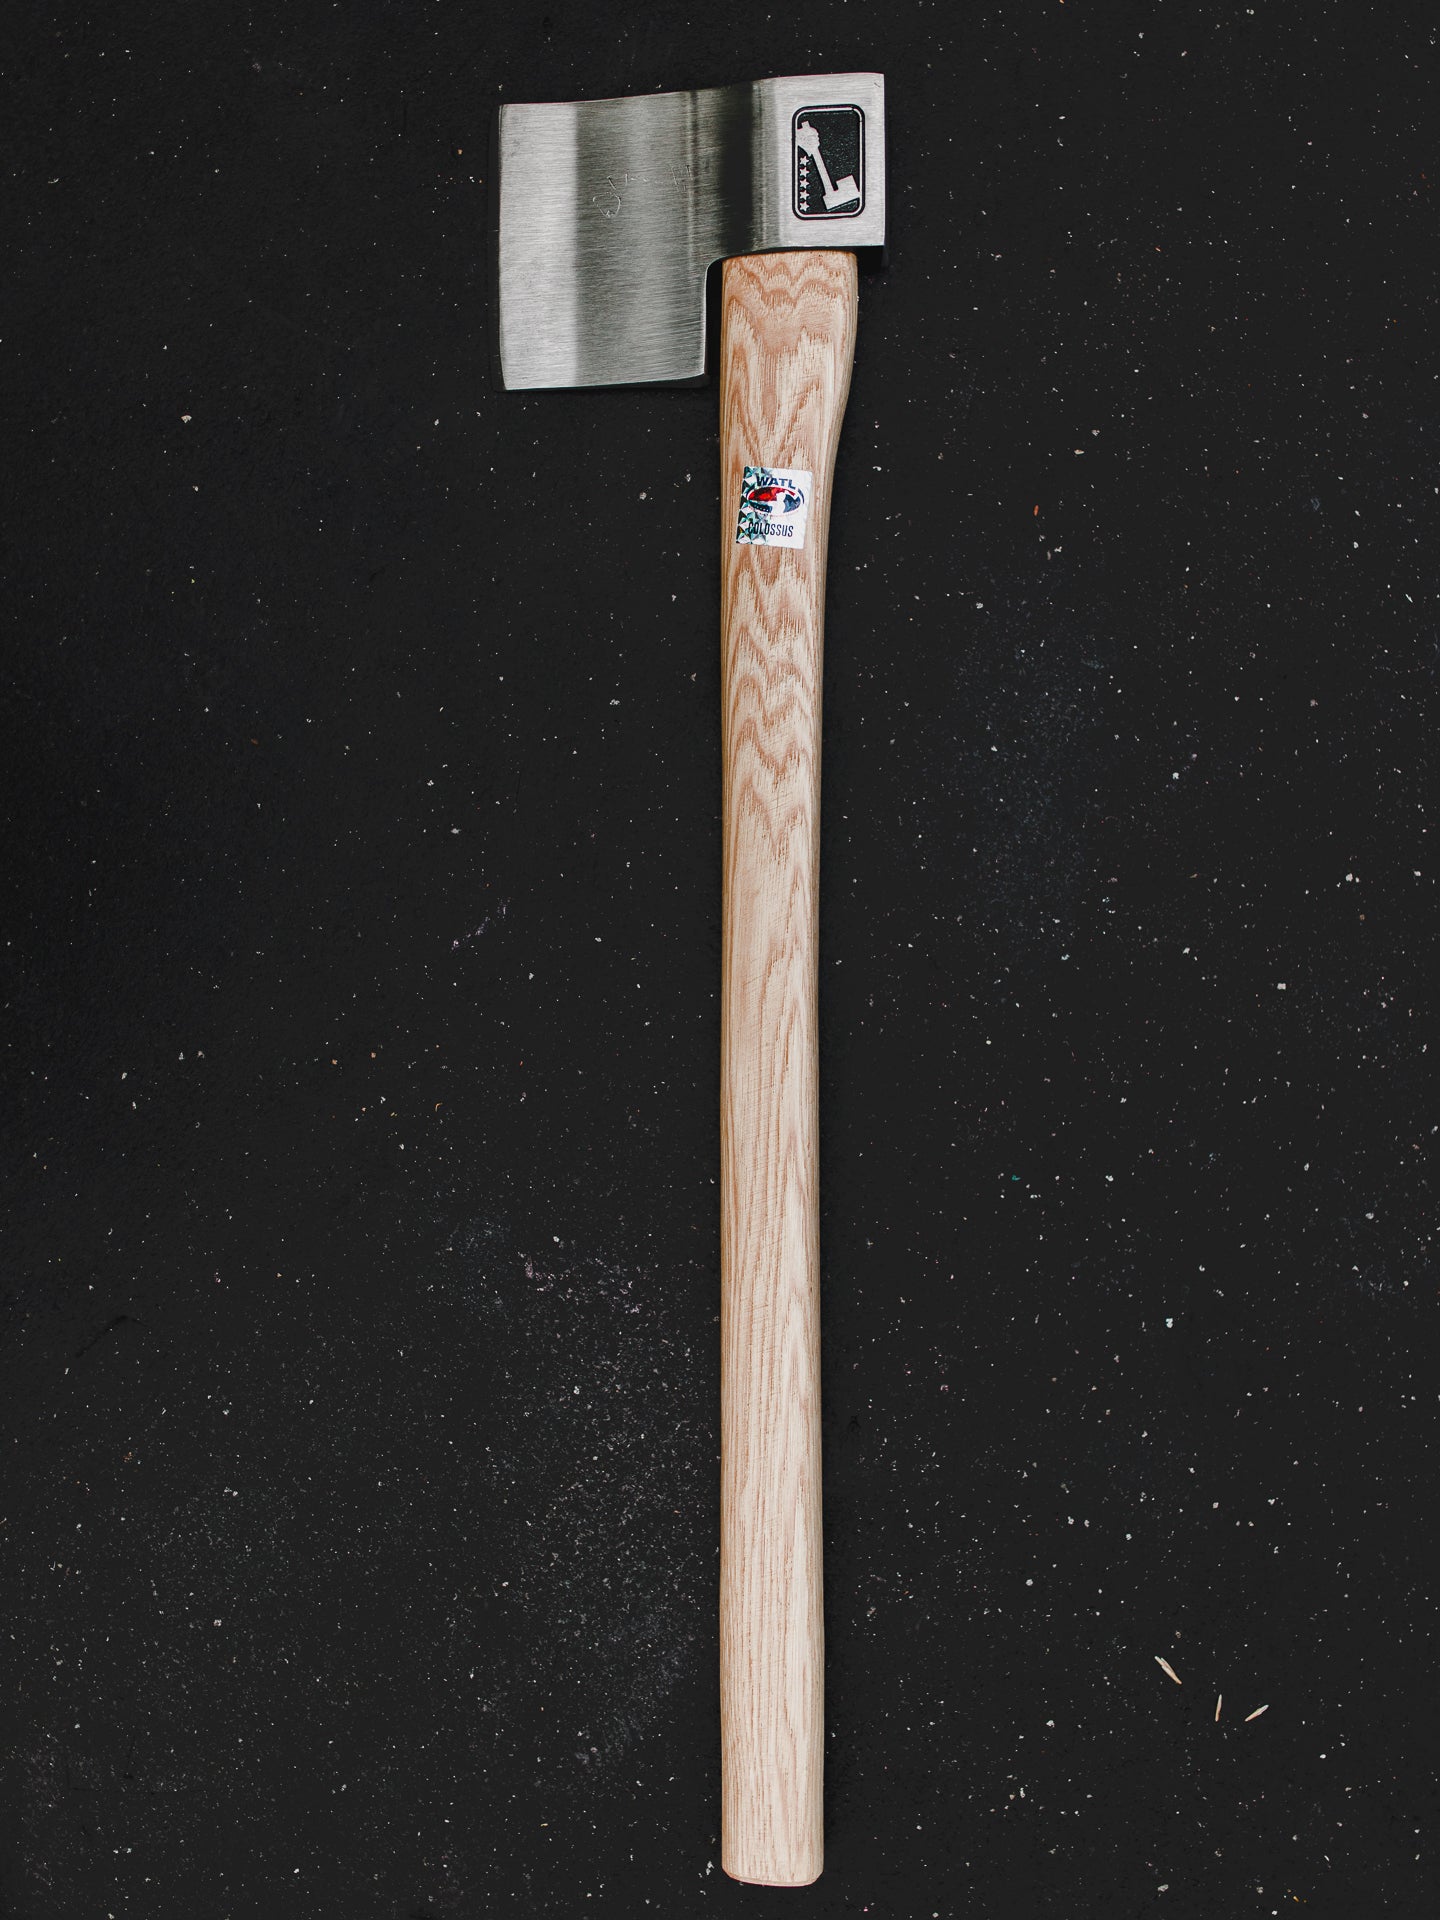 The Colossus Throwing Axe by World Axe Throwing League WATL